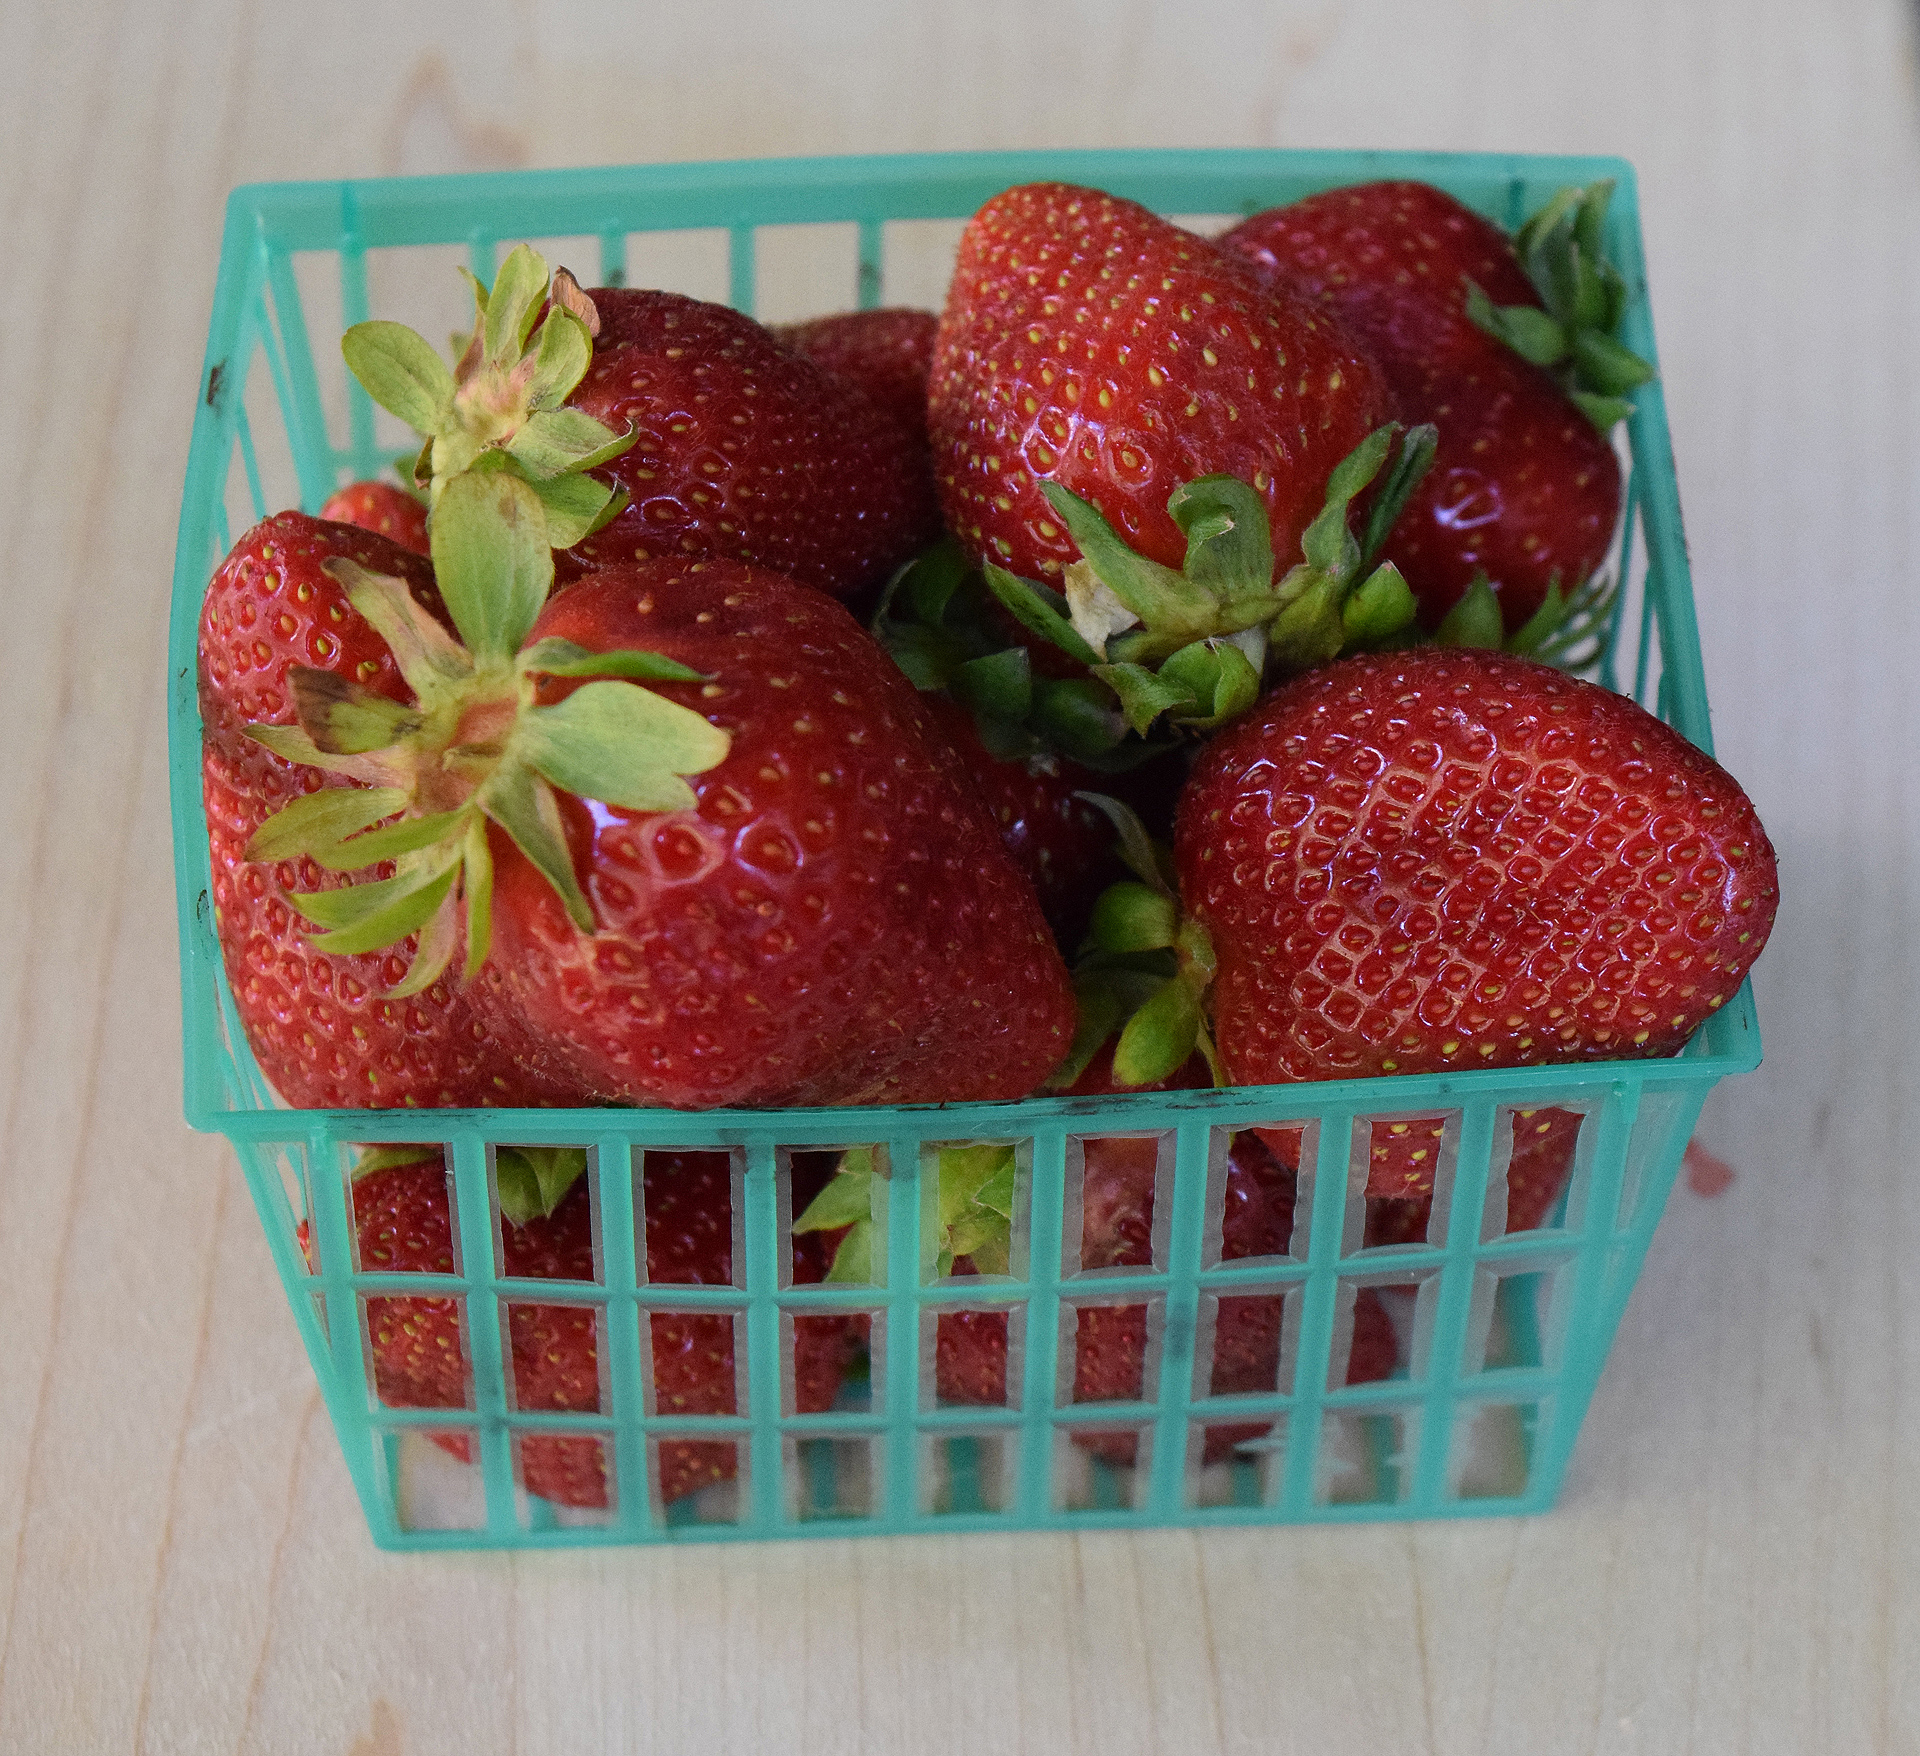 Deep red, perfectly ripe and intensely flavored, the Chandler variety available from Swanton Berry Farm is lower-yield than the Albion variety that organic growers favor.